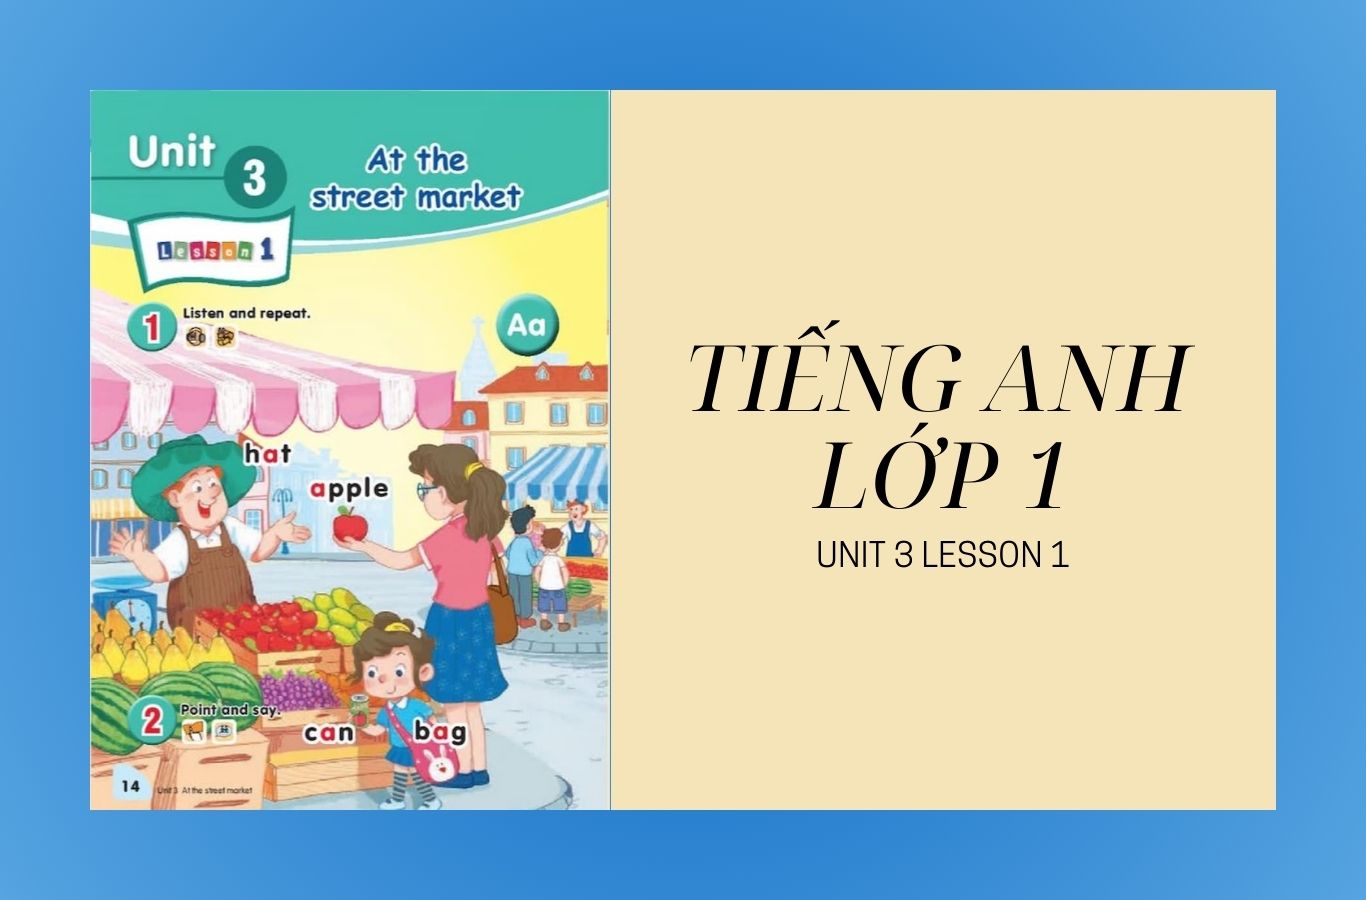 Tiếng Anh lớp 1 Unit 3 lesson 1